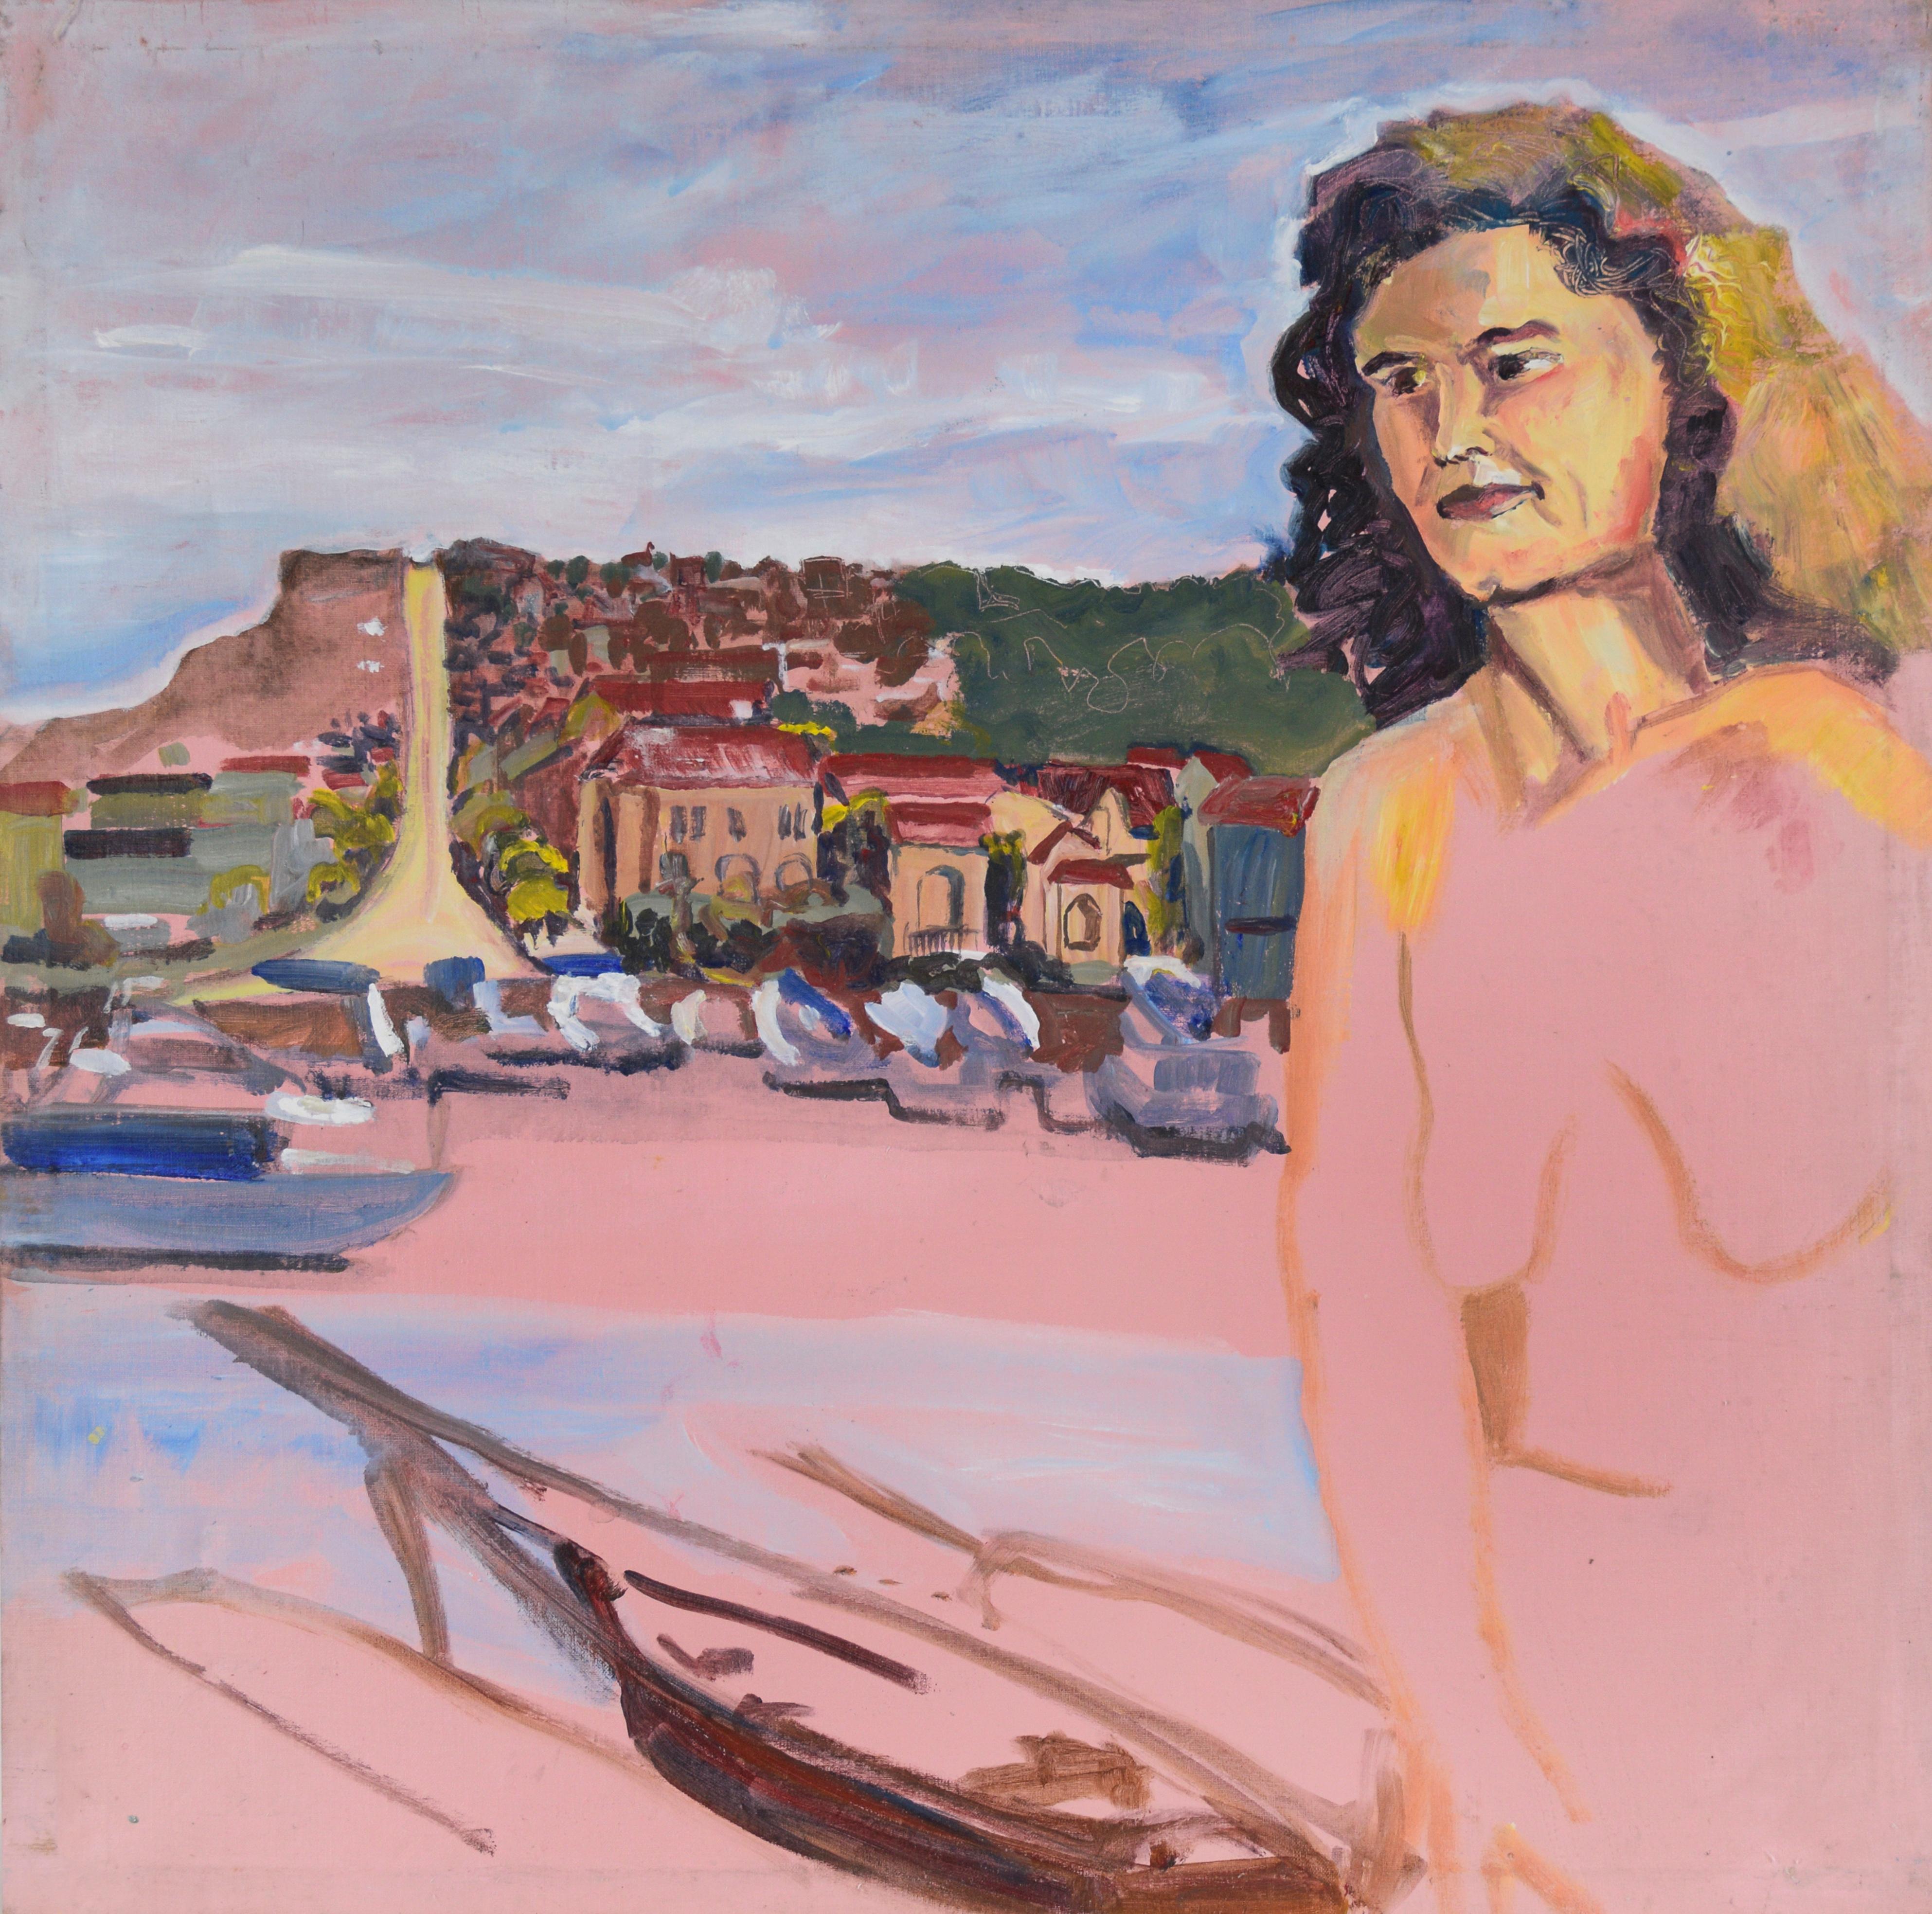 Figurative Study In Sausalito by Patricia Gren Hayes Berkeley Figurative School

Modern painting of a nude woman with the Sausalito landscape in the background by American painter, Patricia Gren Hayes (b. 1932). A brunette woman is seen at the right